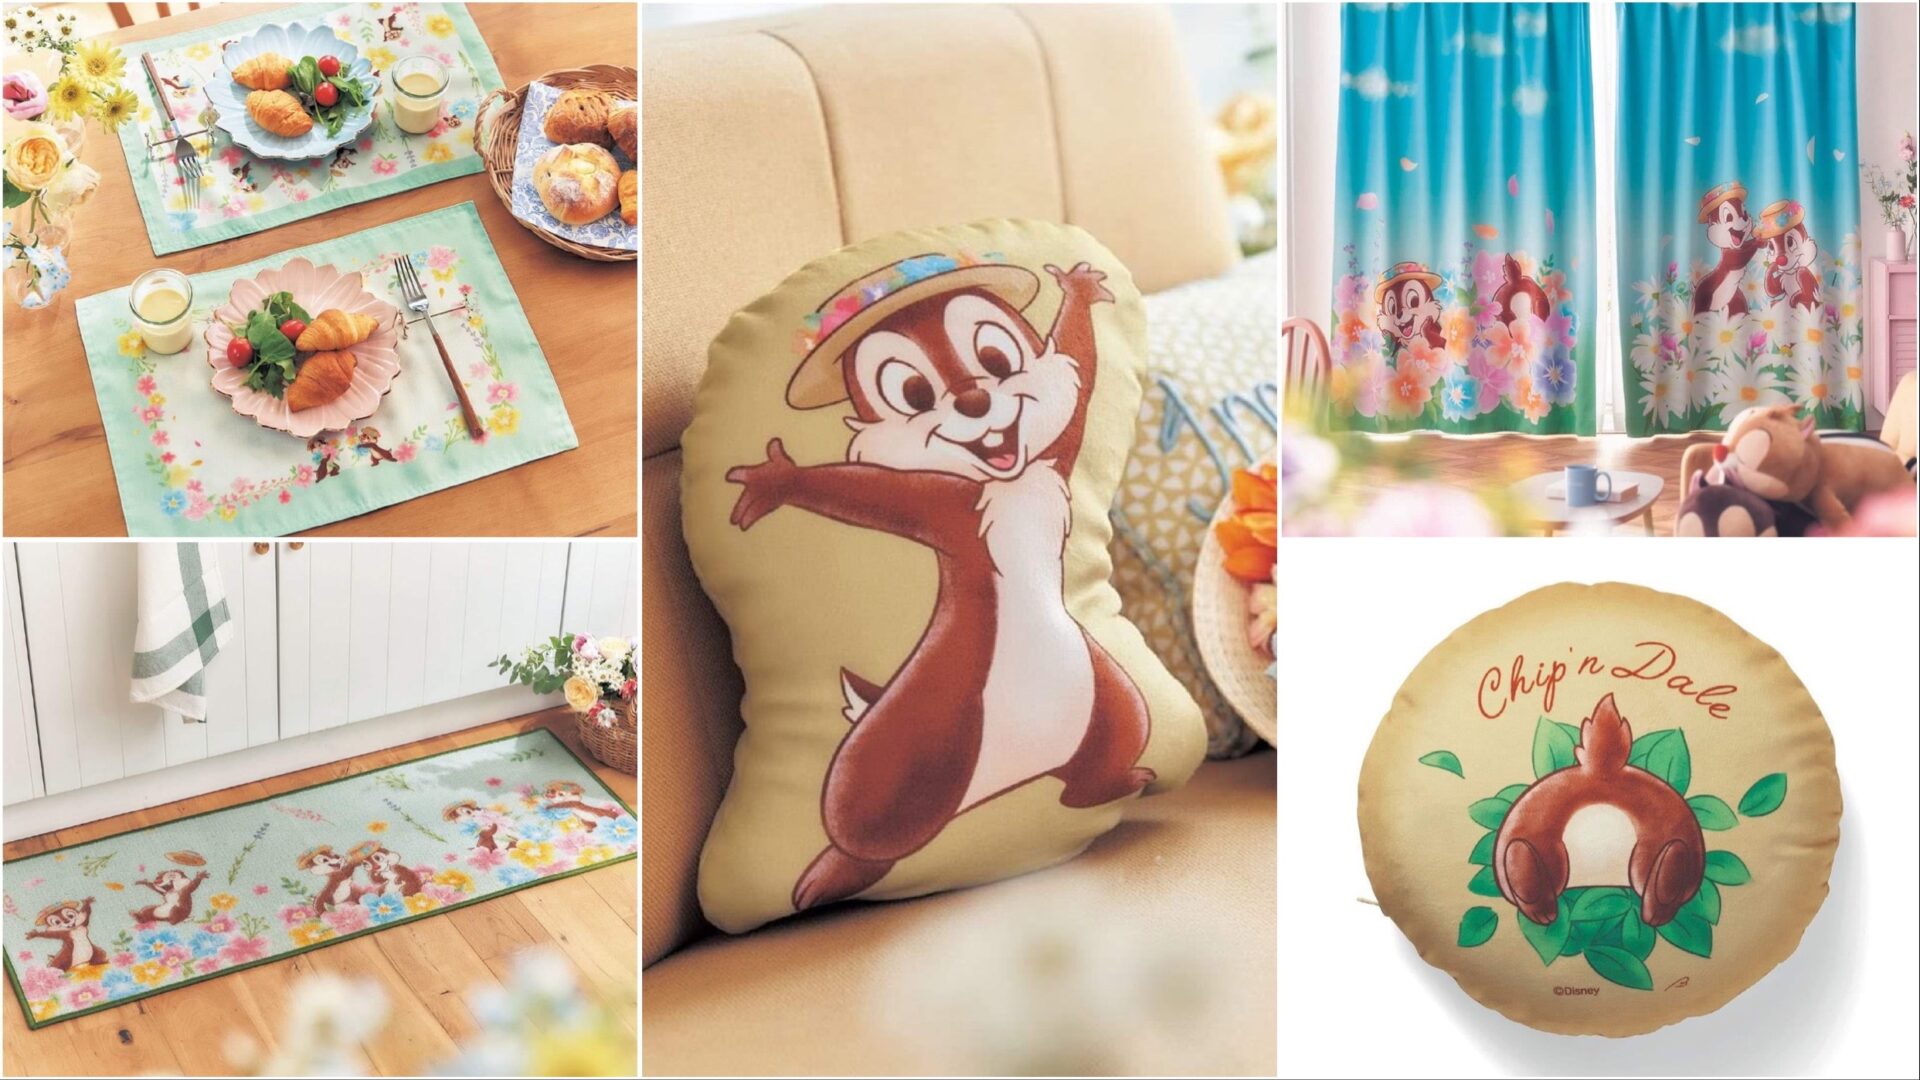 Super Cute Chip & Dale Home Collection From shopDisney!